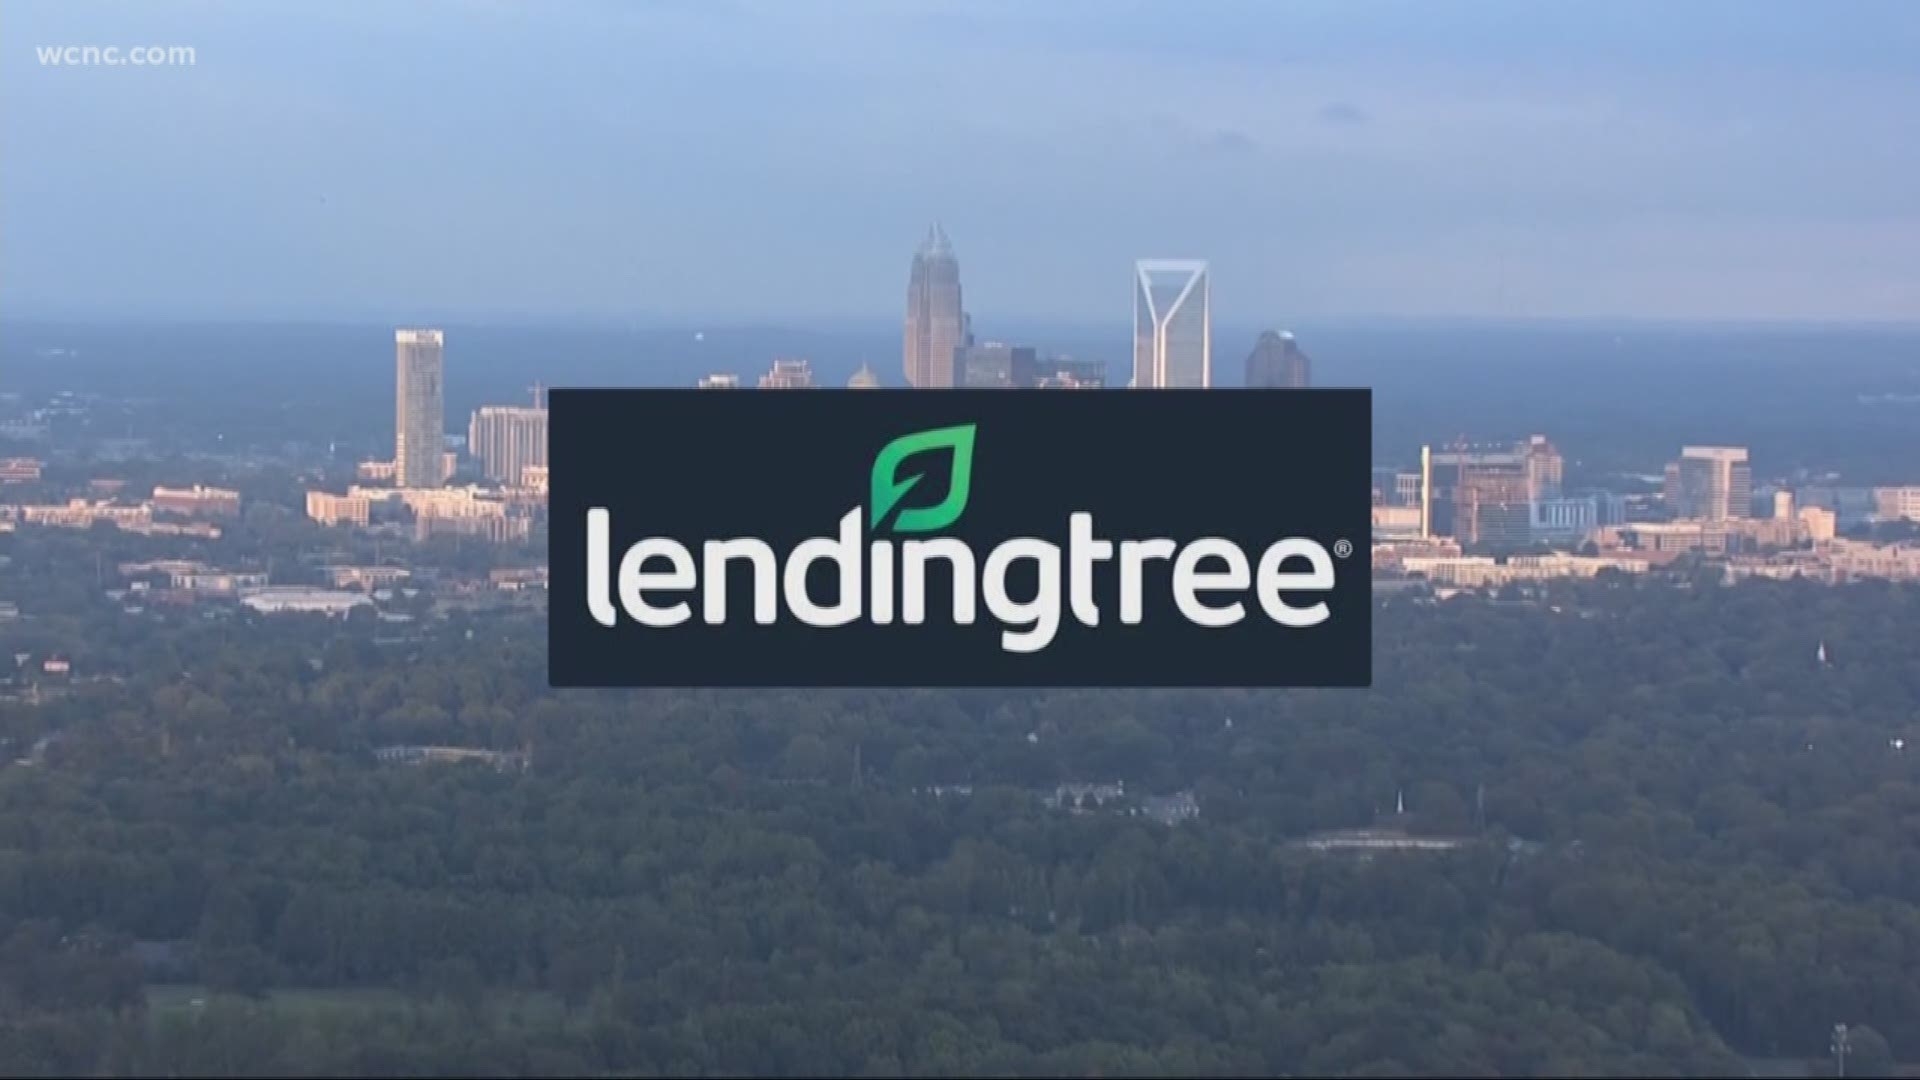 LendingTree announced it is expanding its headquarters in Charlotte. Honeywell is also moving to Charlotte.